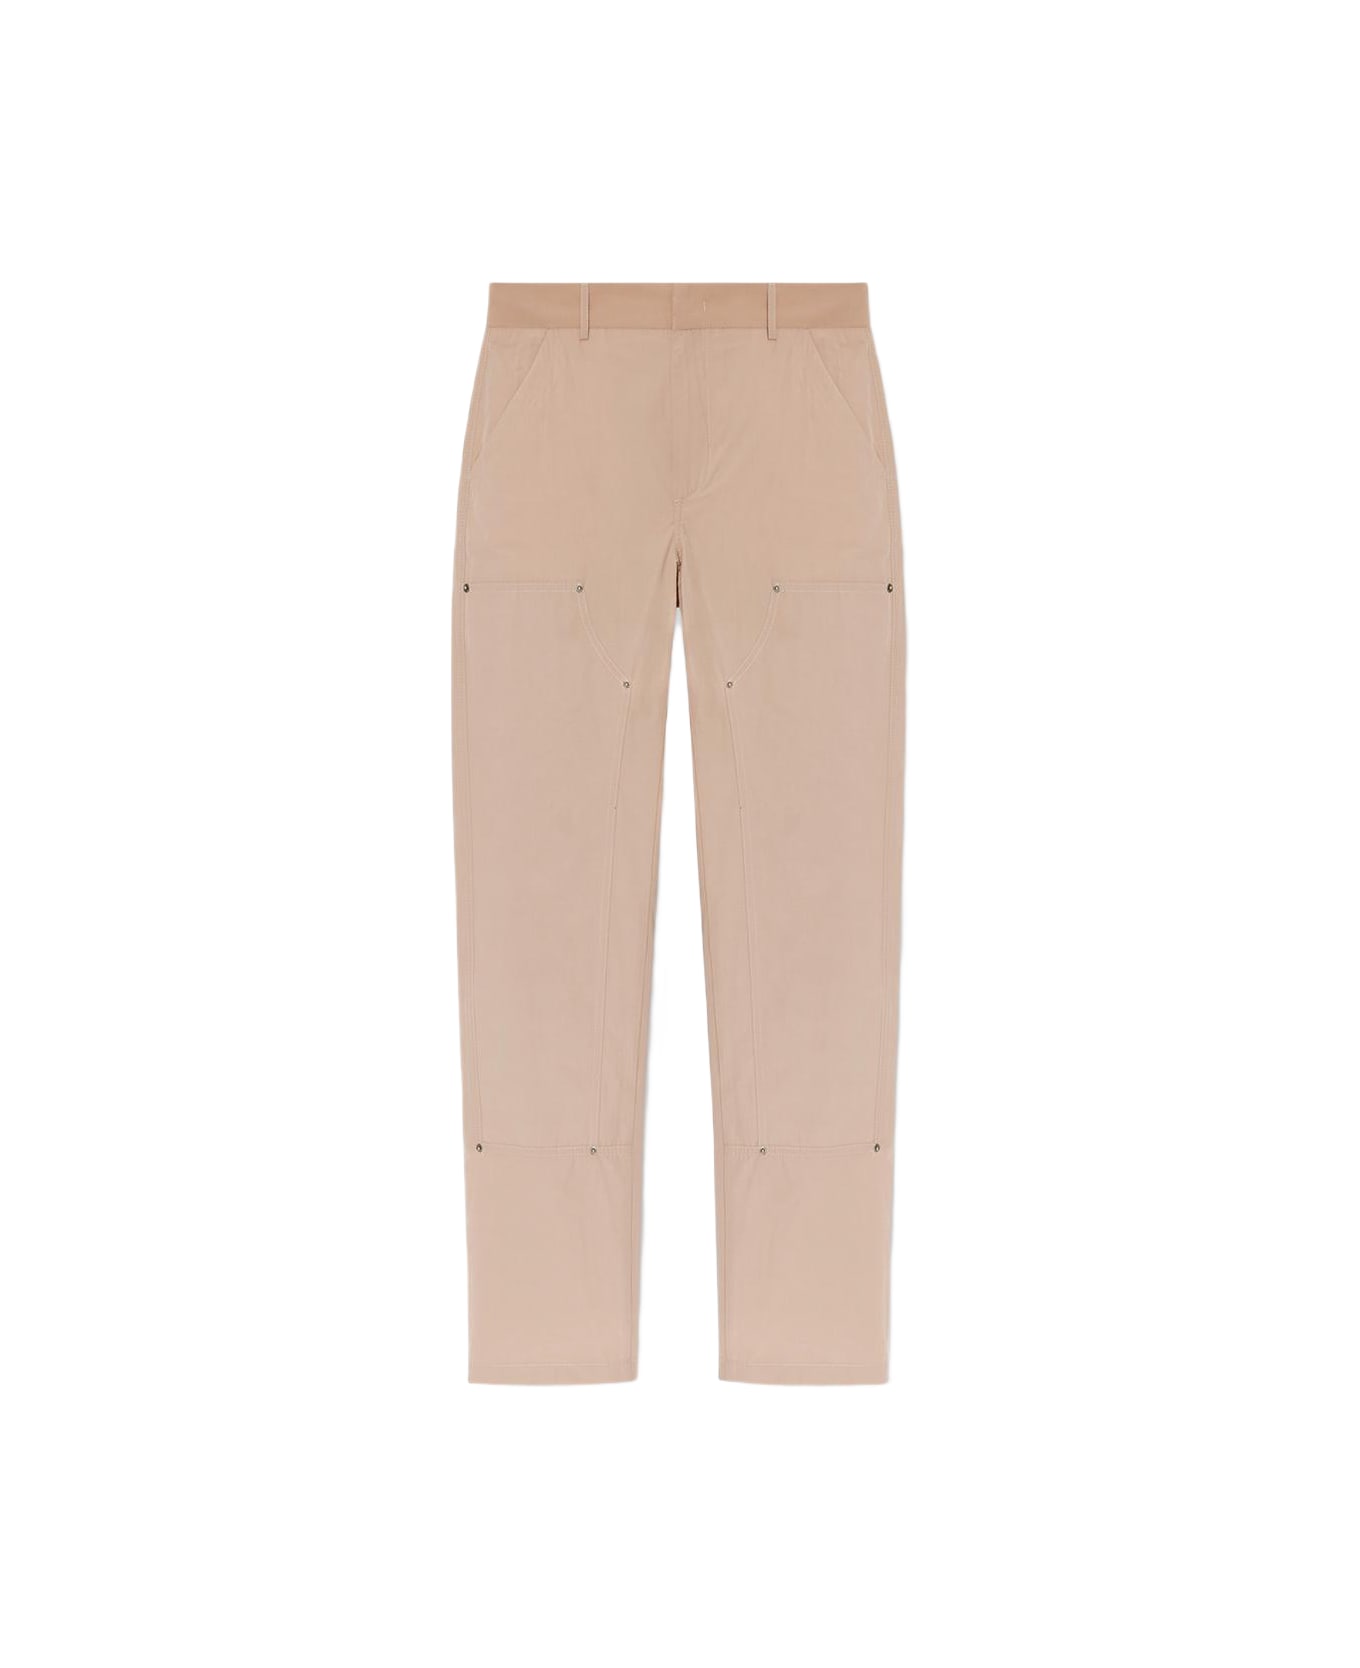 FourTwoFour on Fairfax Trousers panelled With Pockets - BEIGE